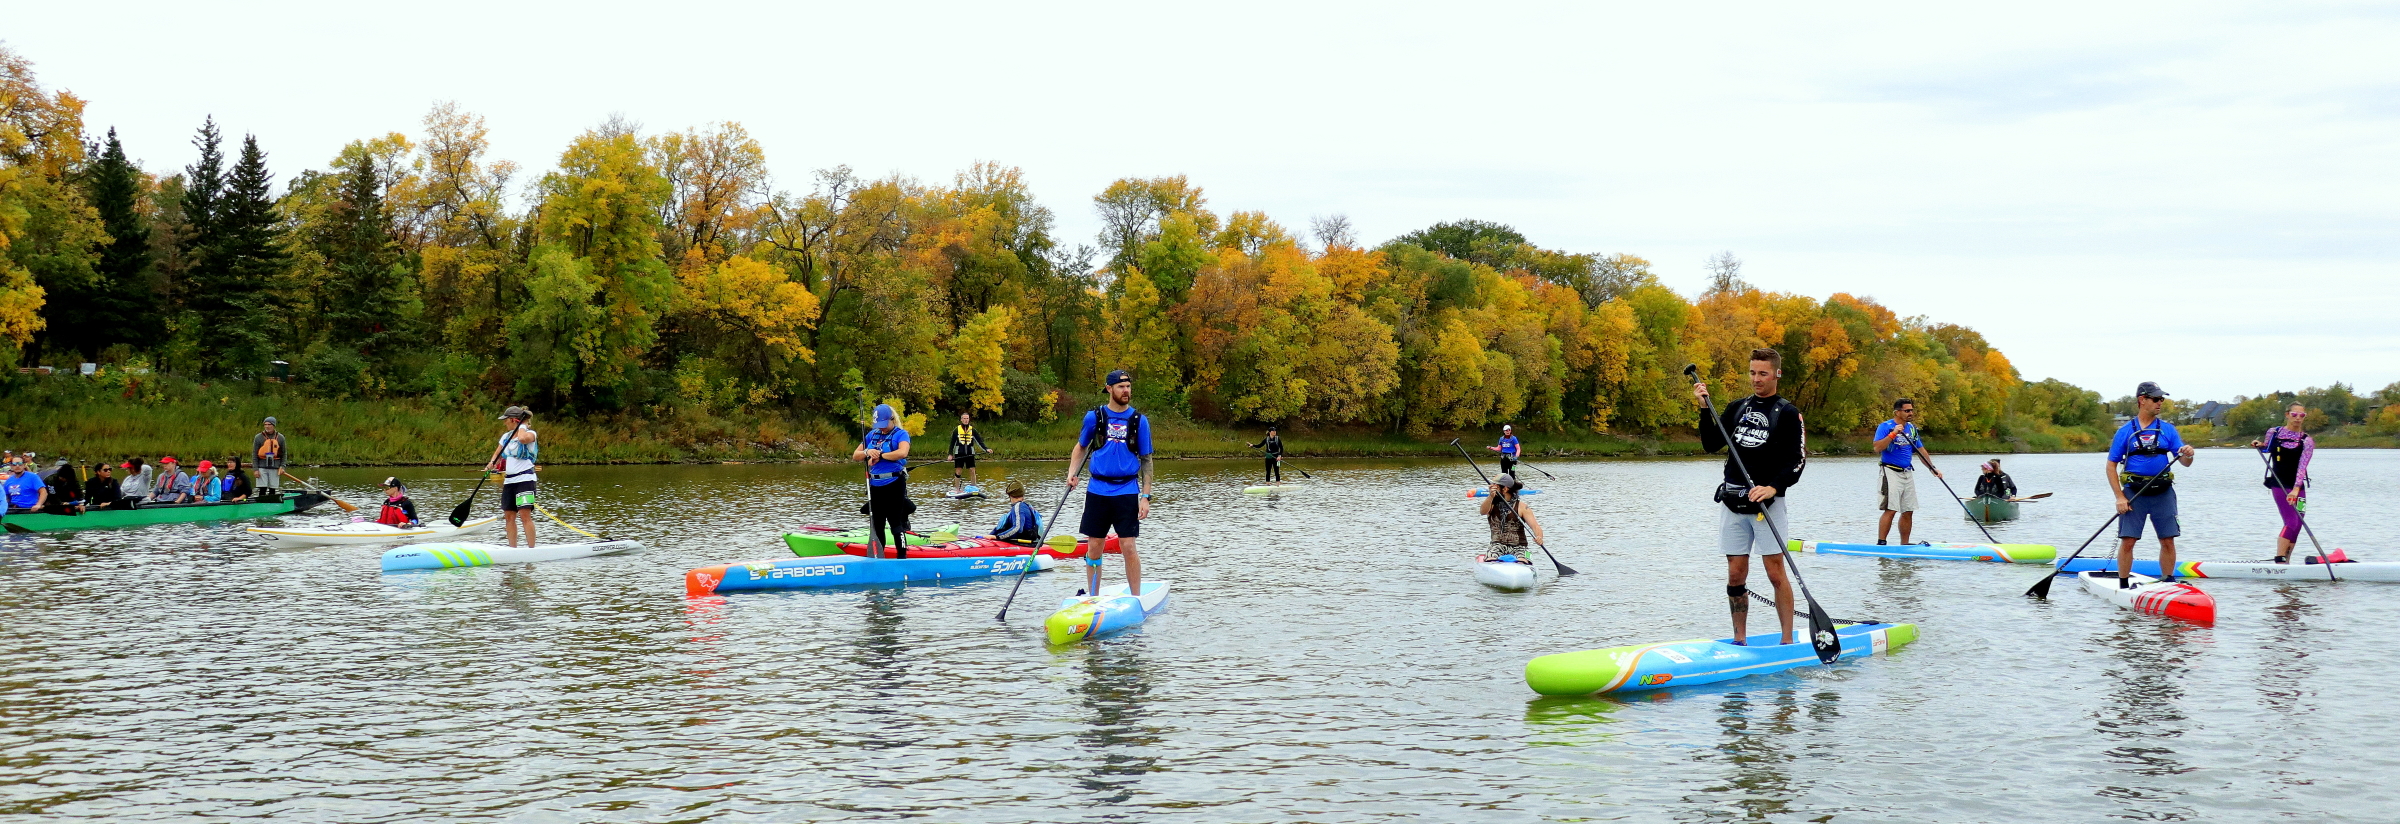 Red River Paddle Challenge Canoe